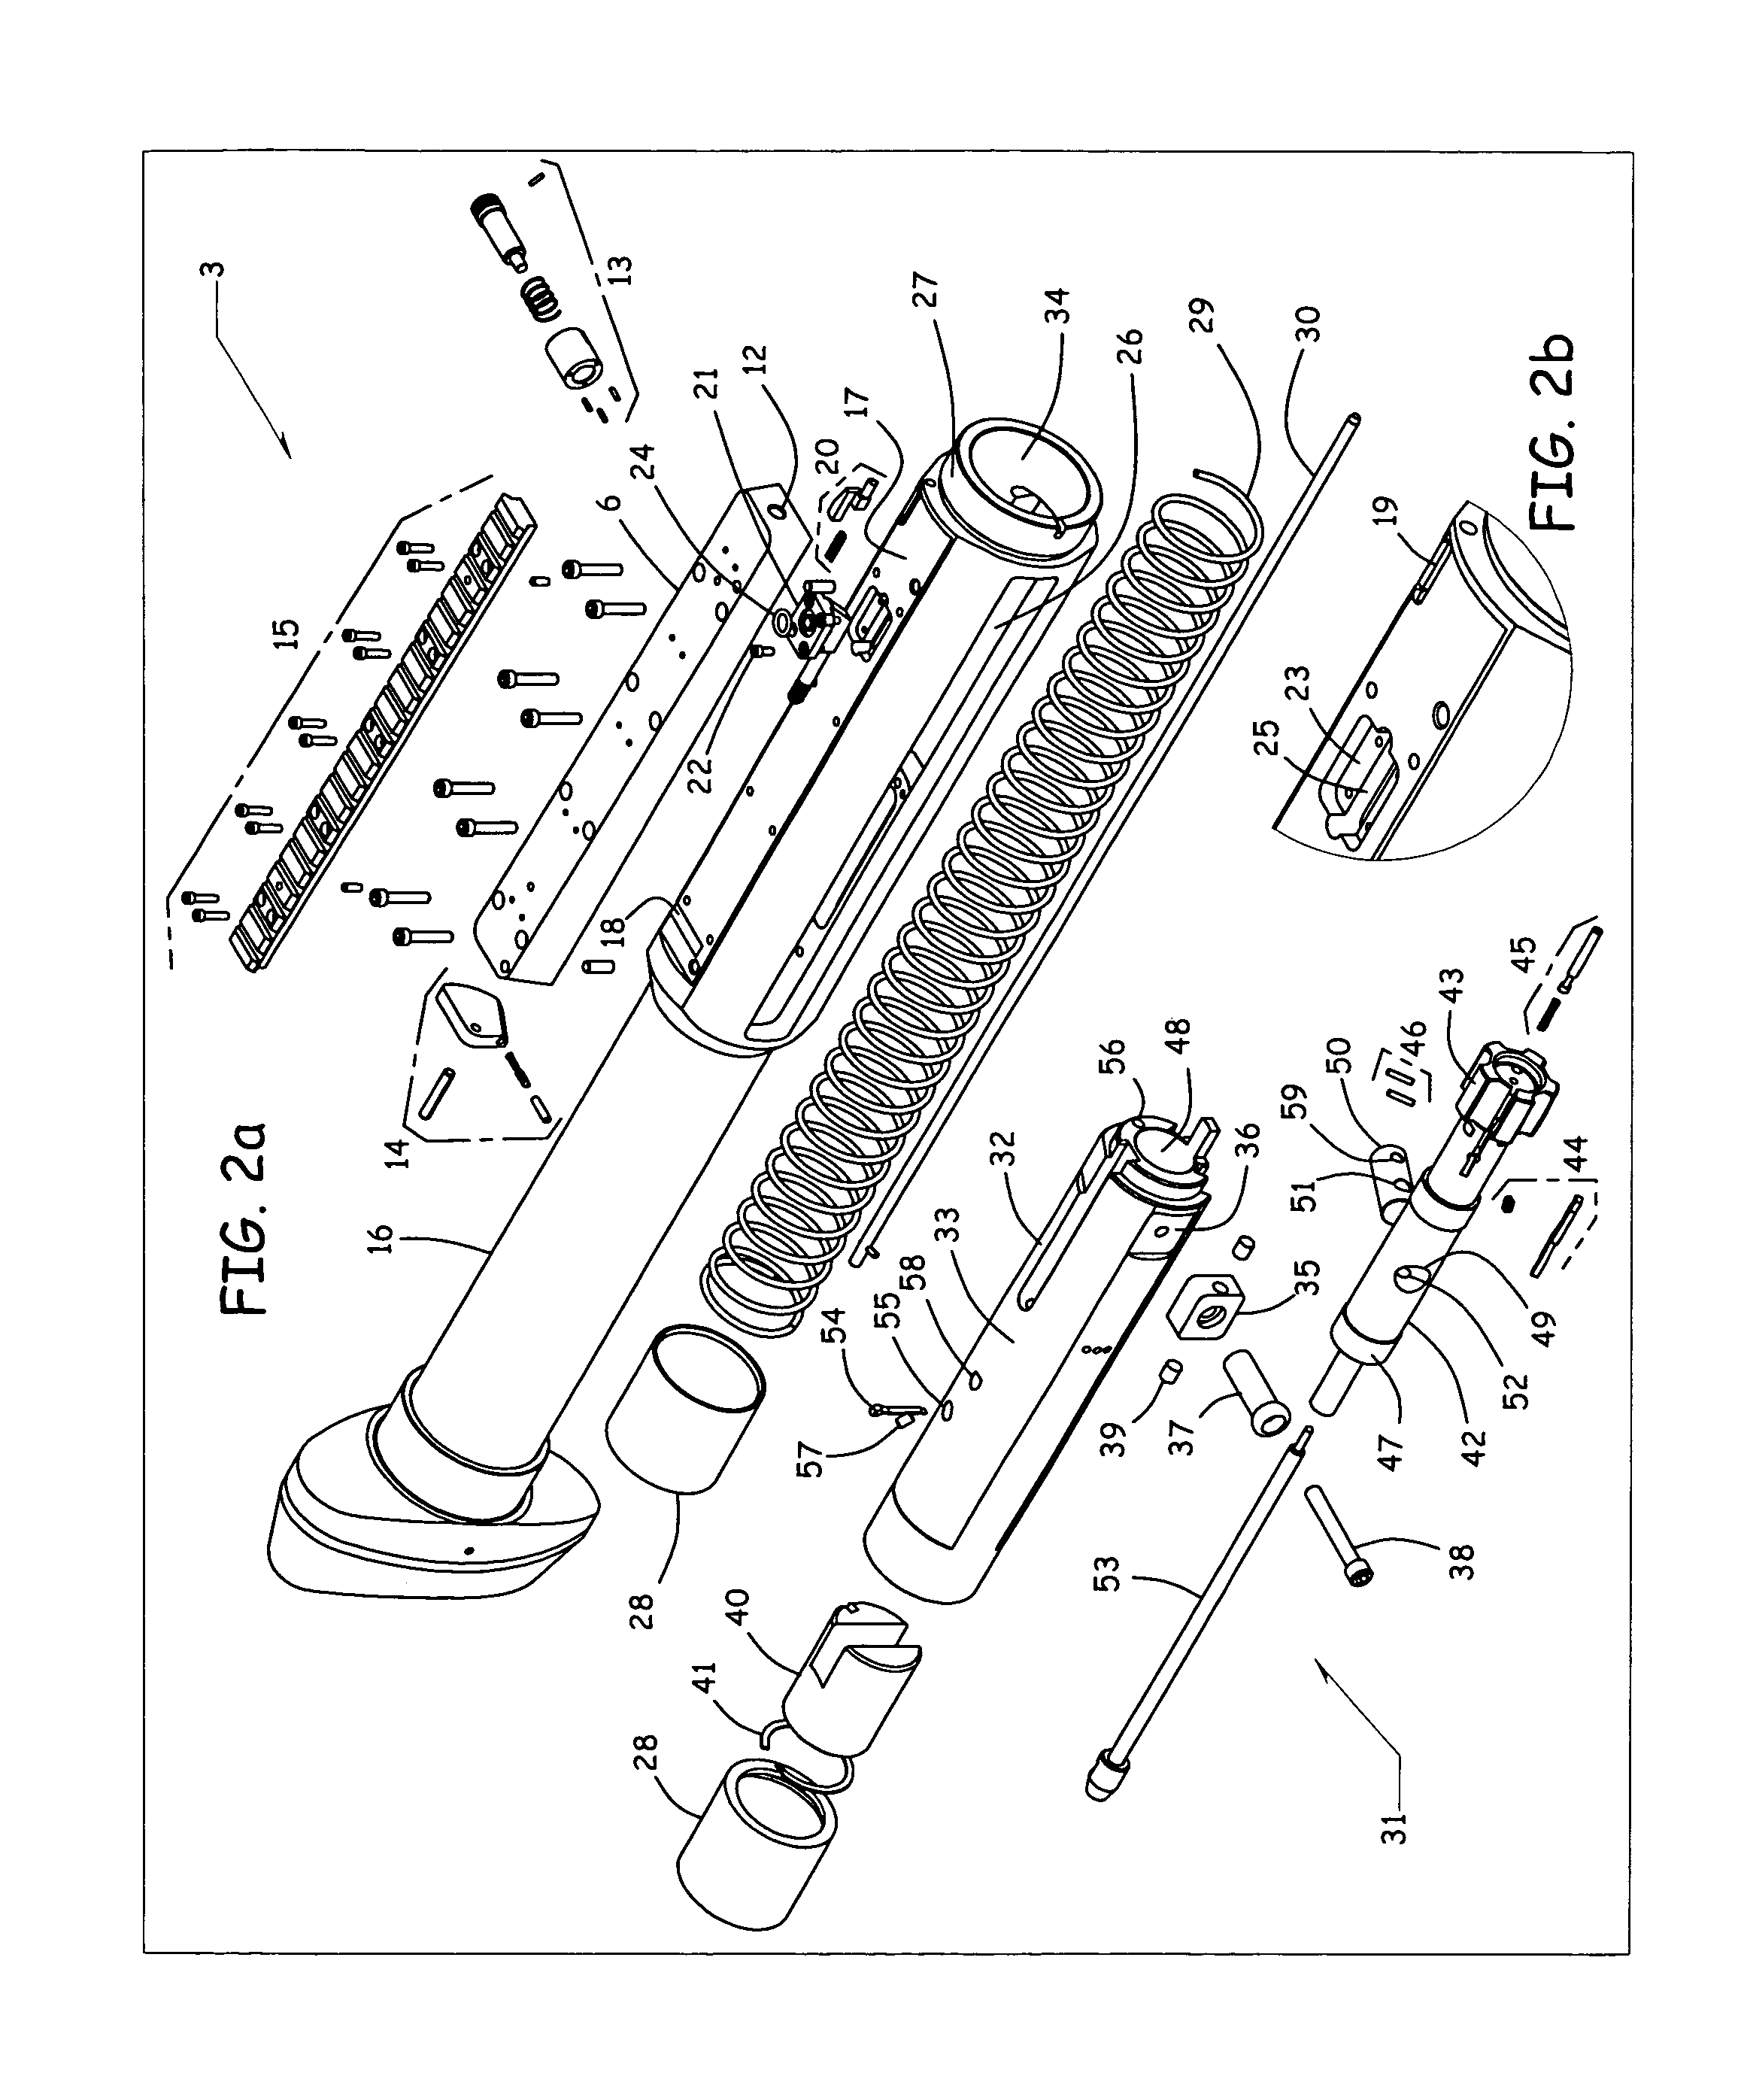 Gas operated action for auto-loading firearms